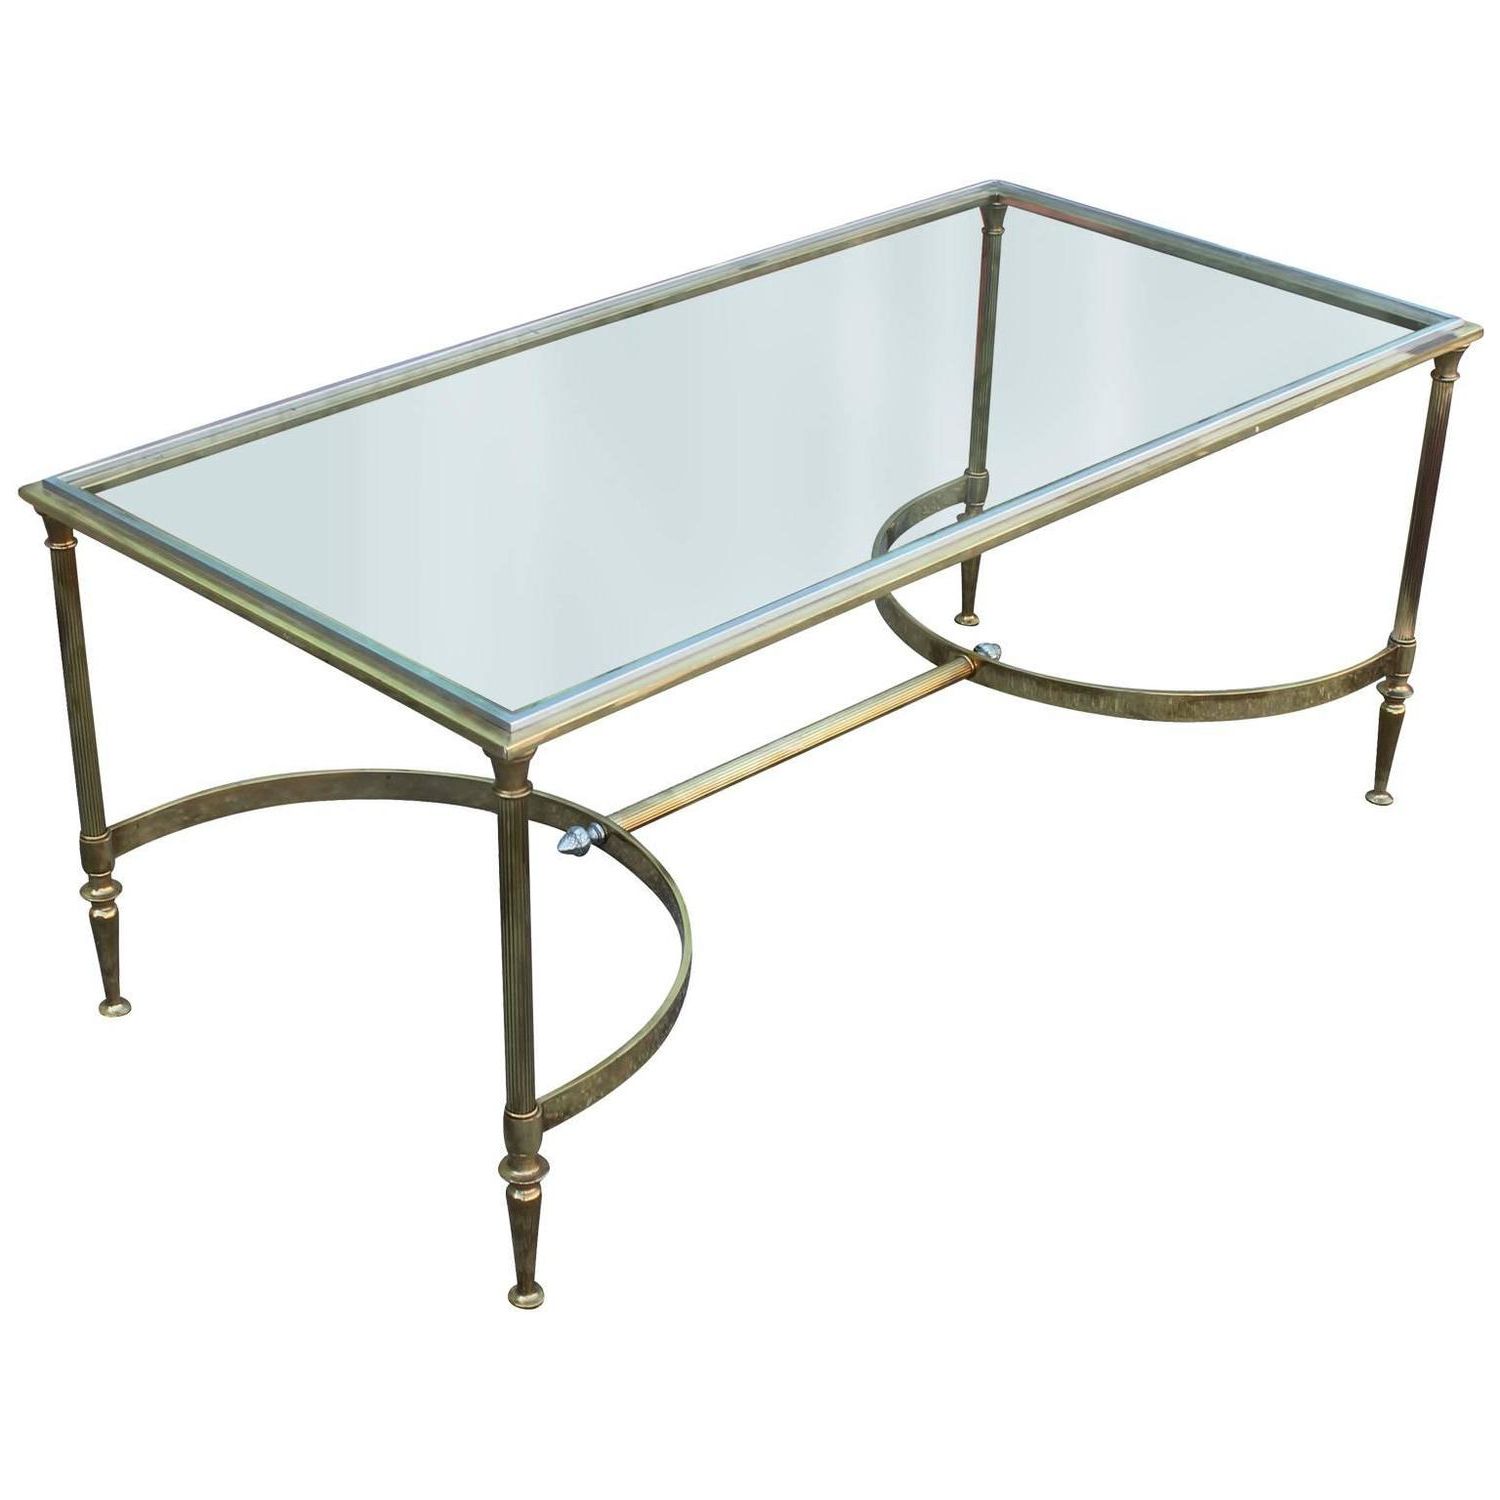 Elegant Brass And Glass Cocktail Table With Chrome Accents Throughout Preferred Glass And Chrome Cocktail Tables (Gallery 6 of 20)